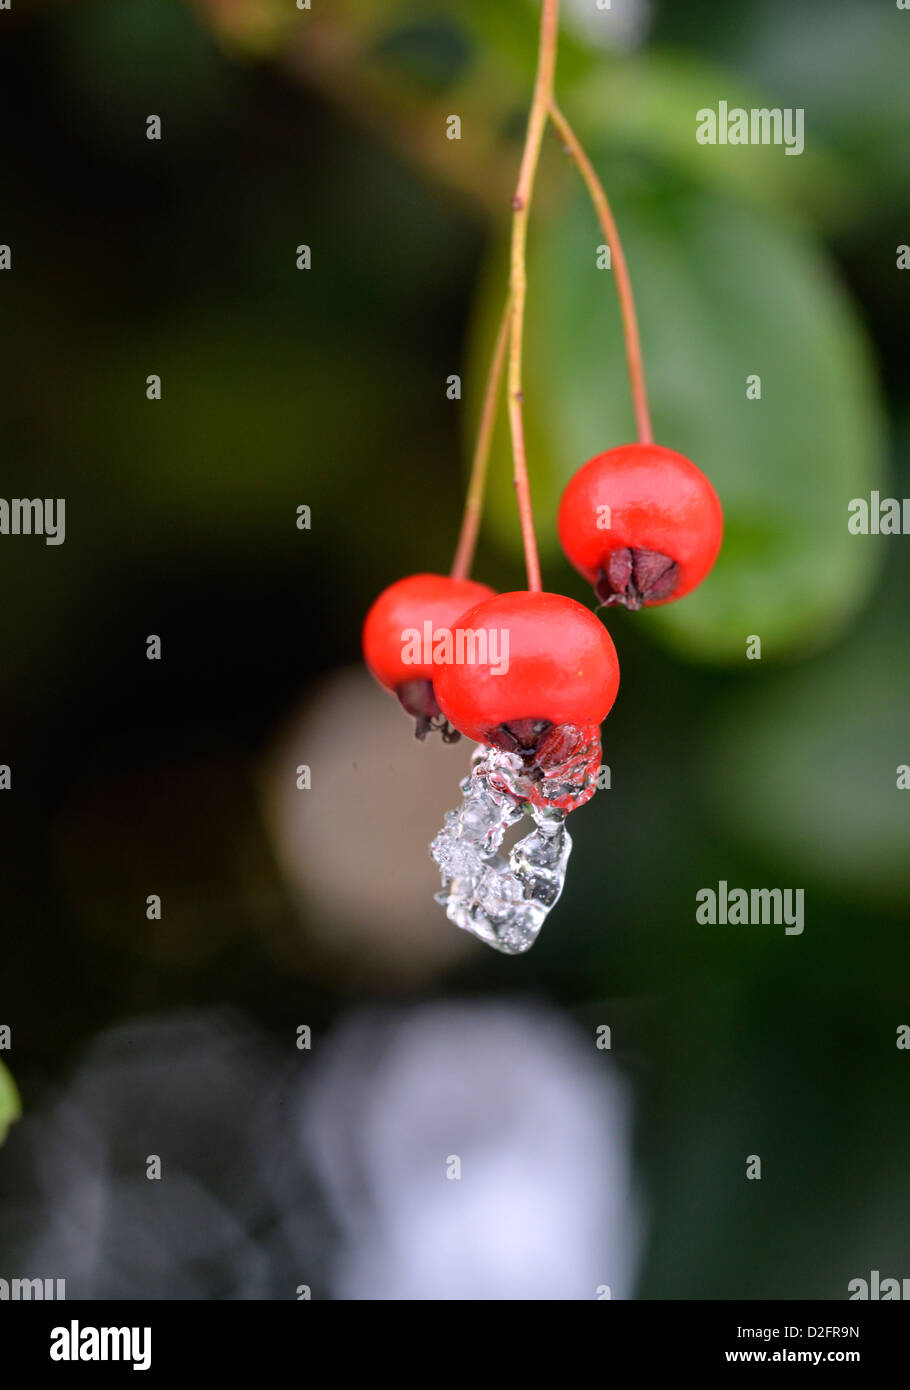 A close-up photograph of melting ice on red Cotoneaster berries. Stock Photo